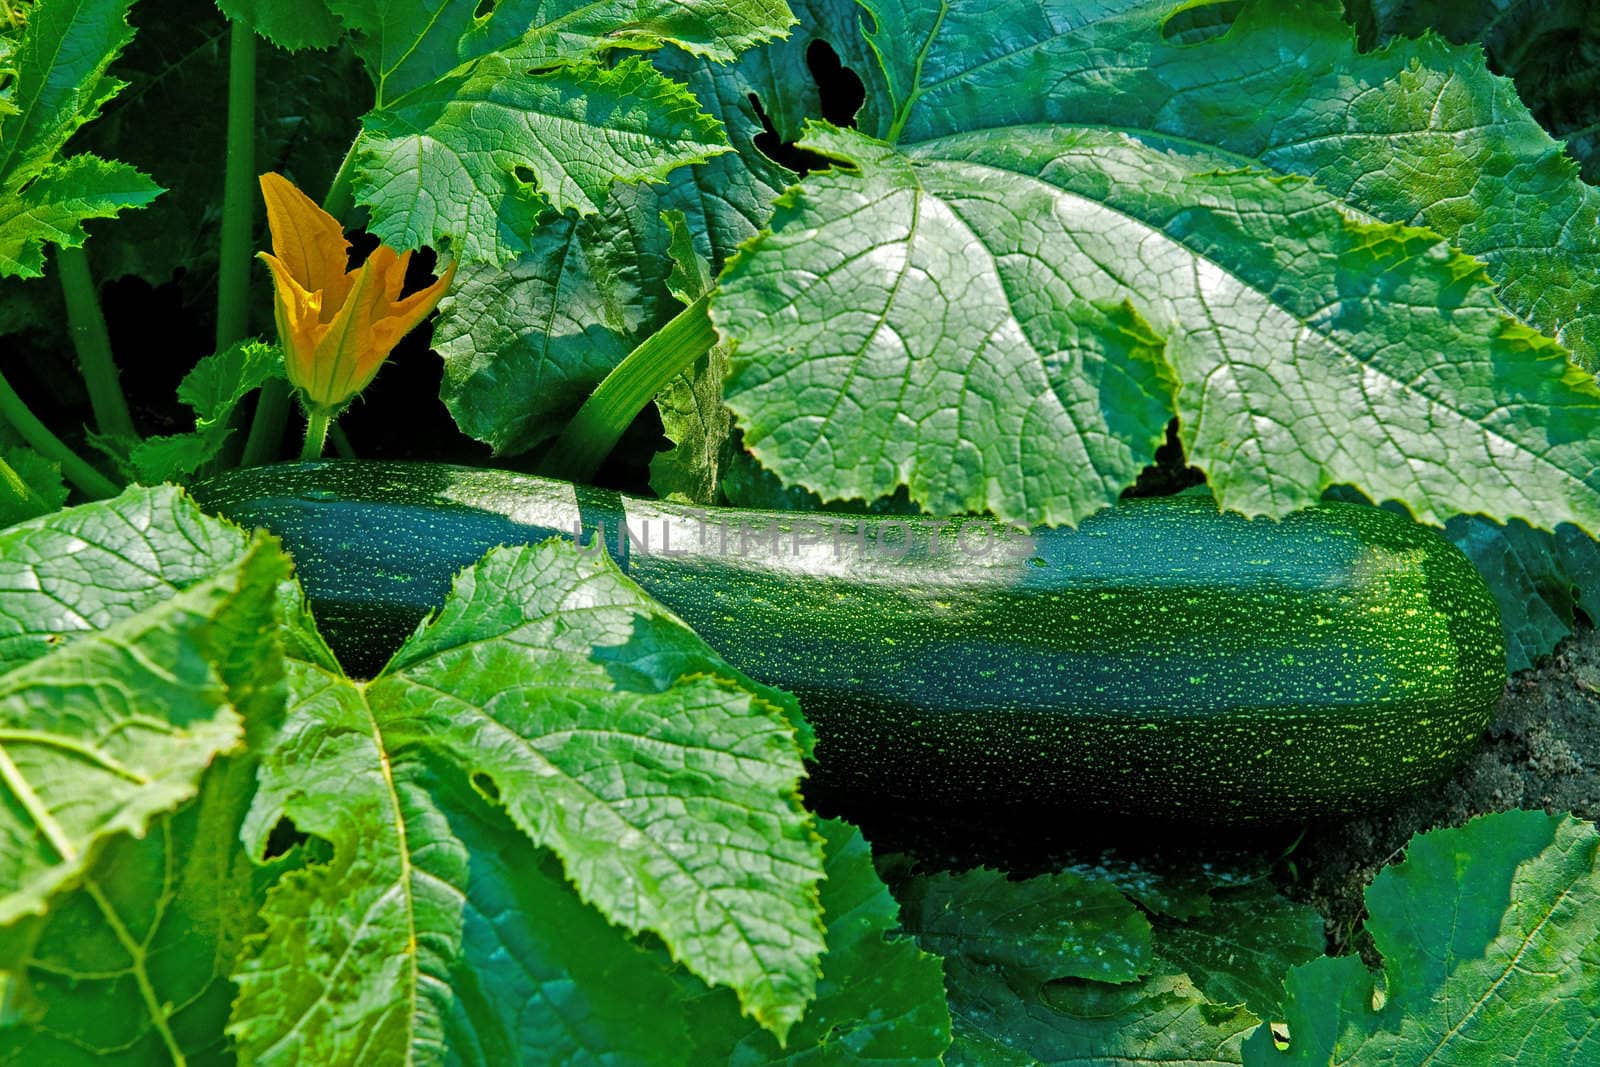 A courgette in the garden